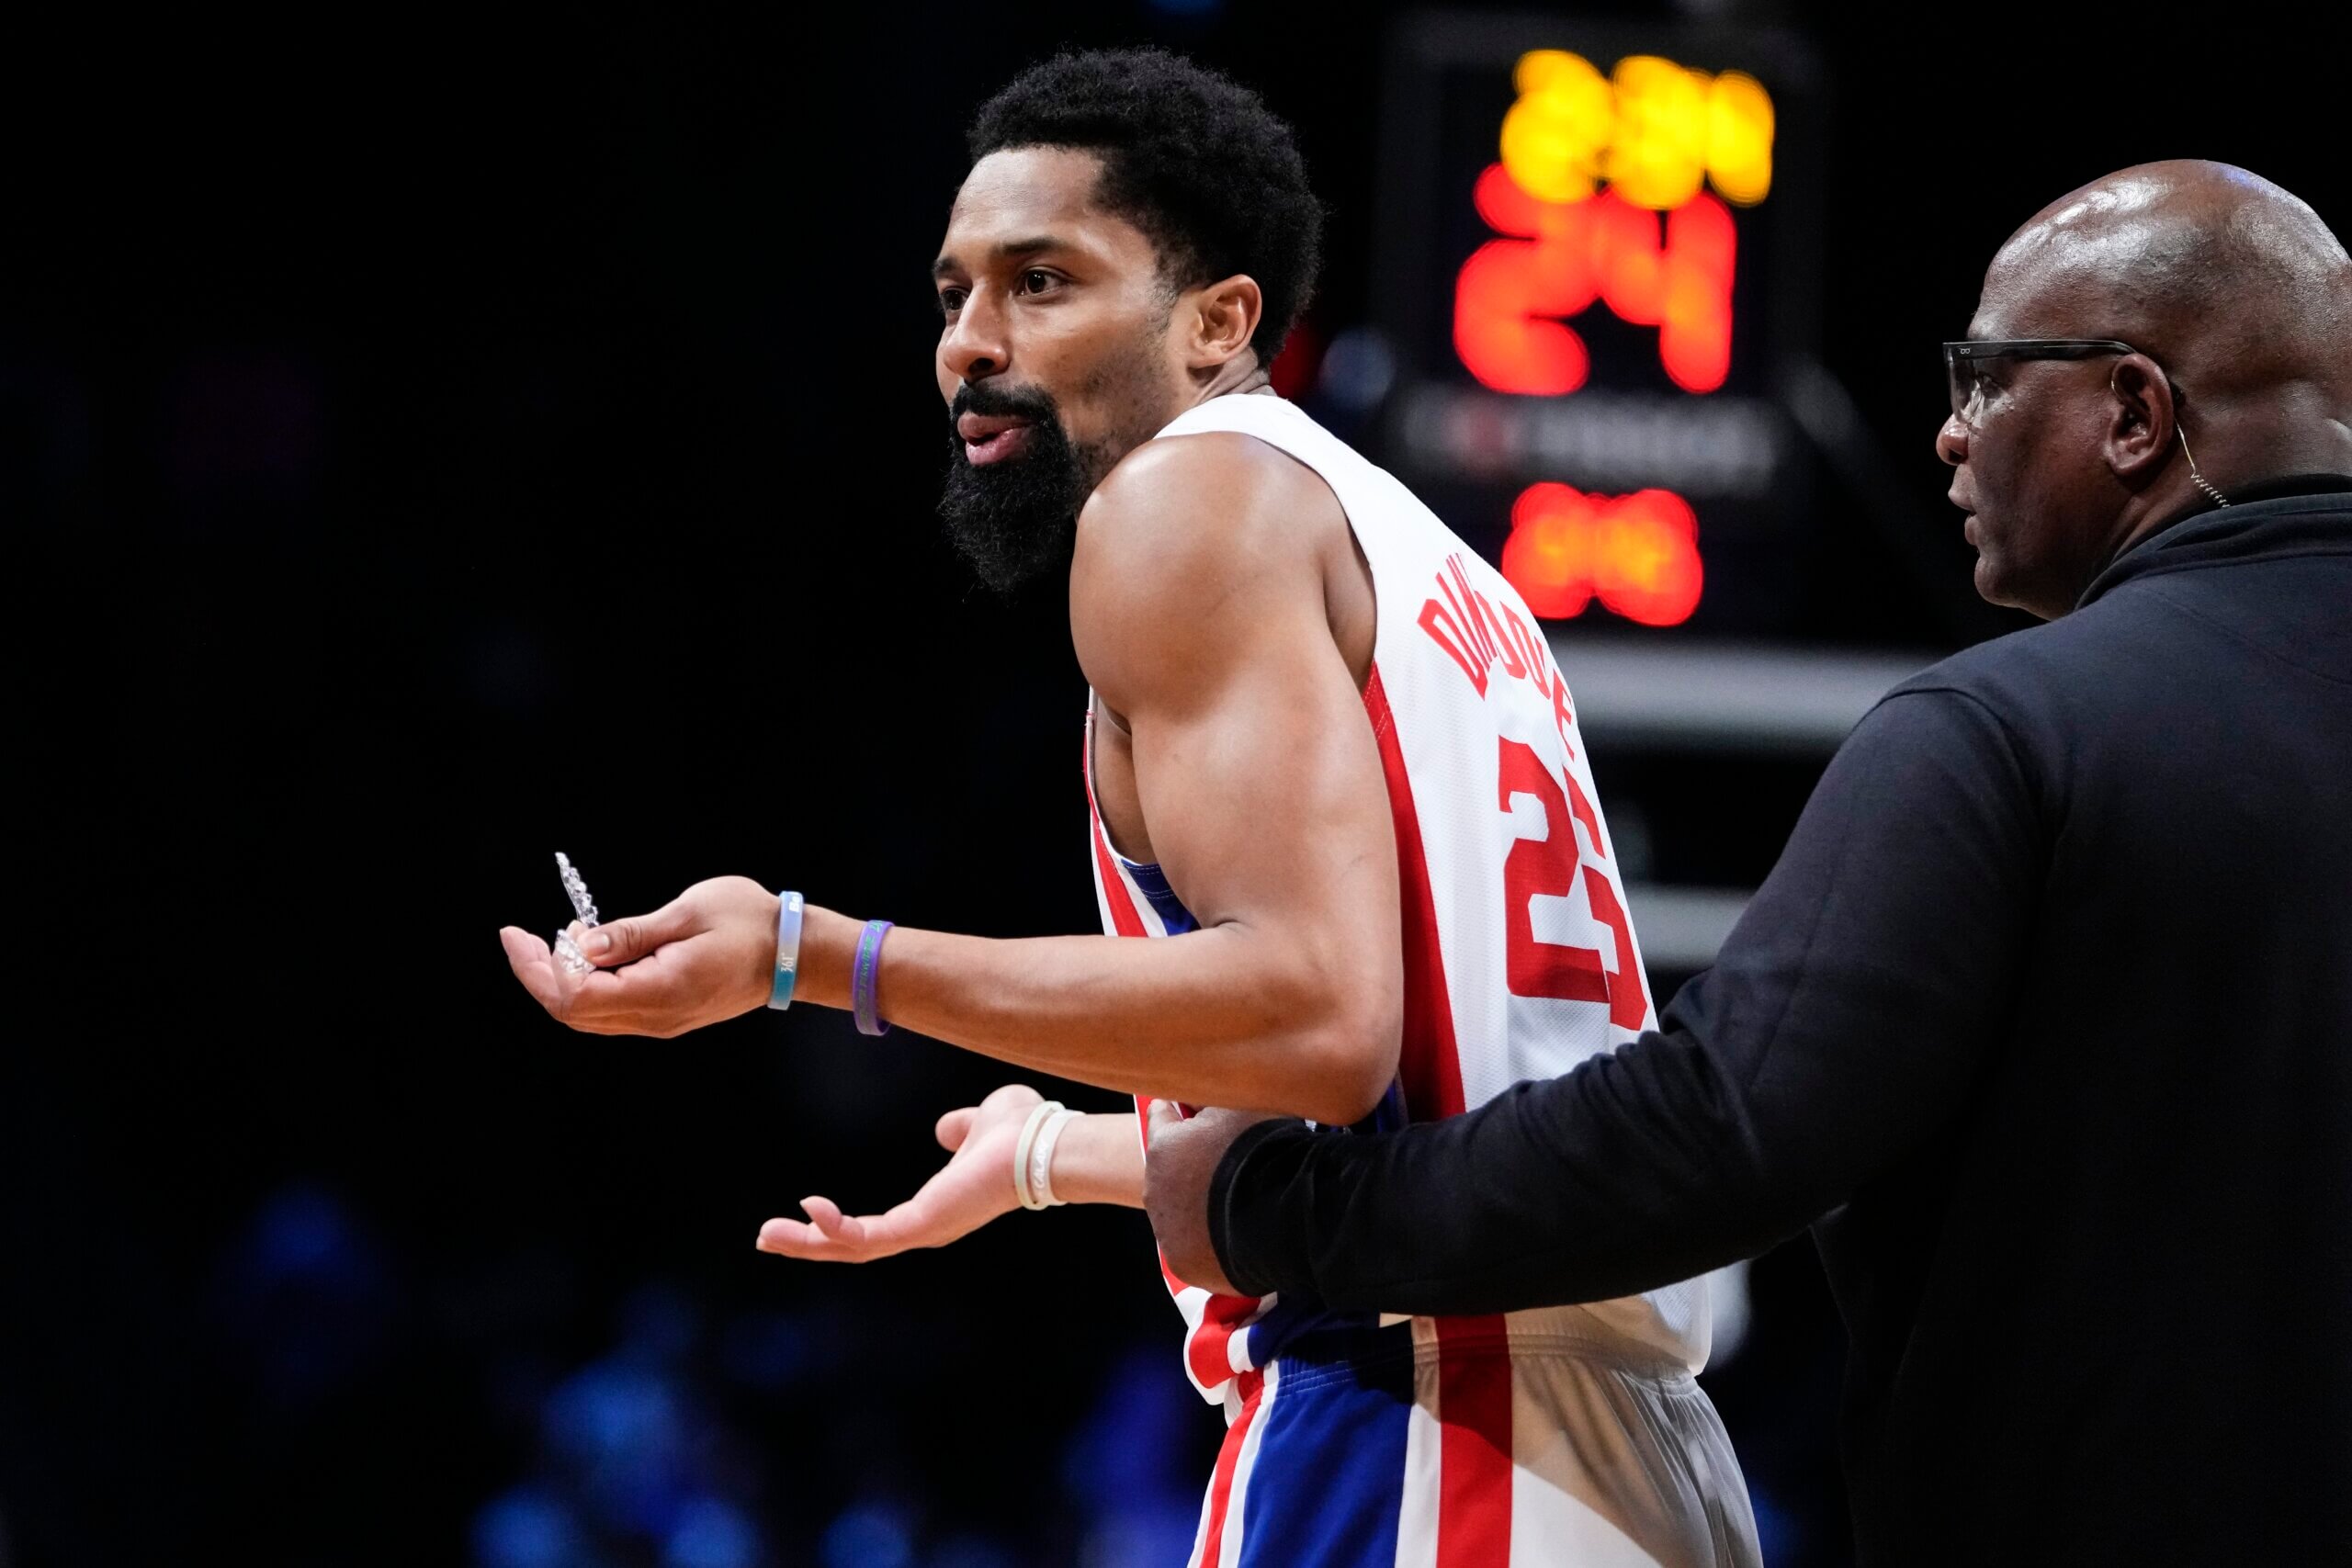 Report: Nets' Spencer Dinwiddie May Face NBA Discipline over